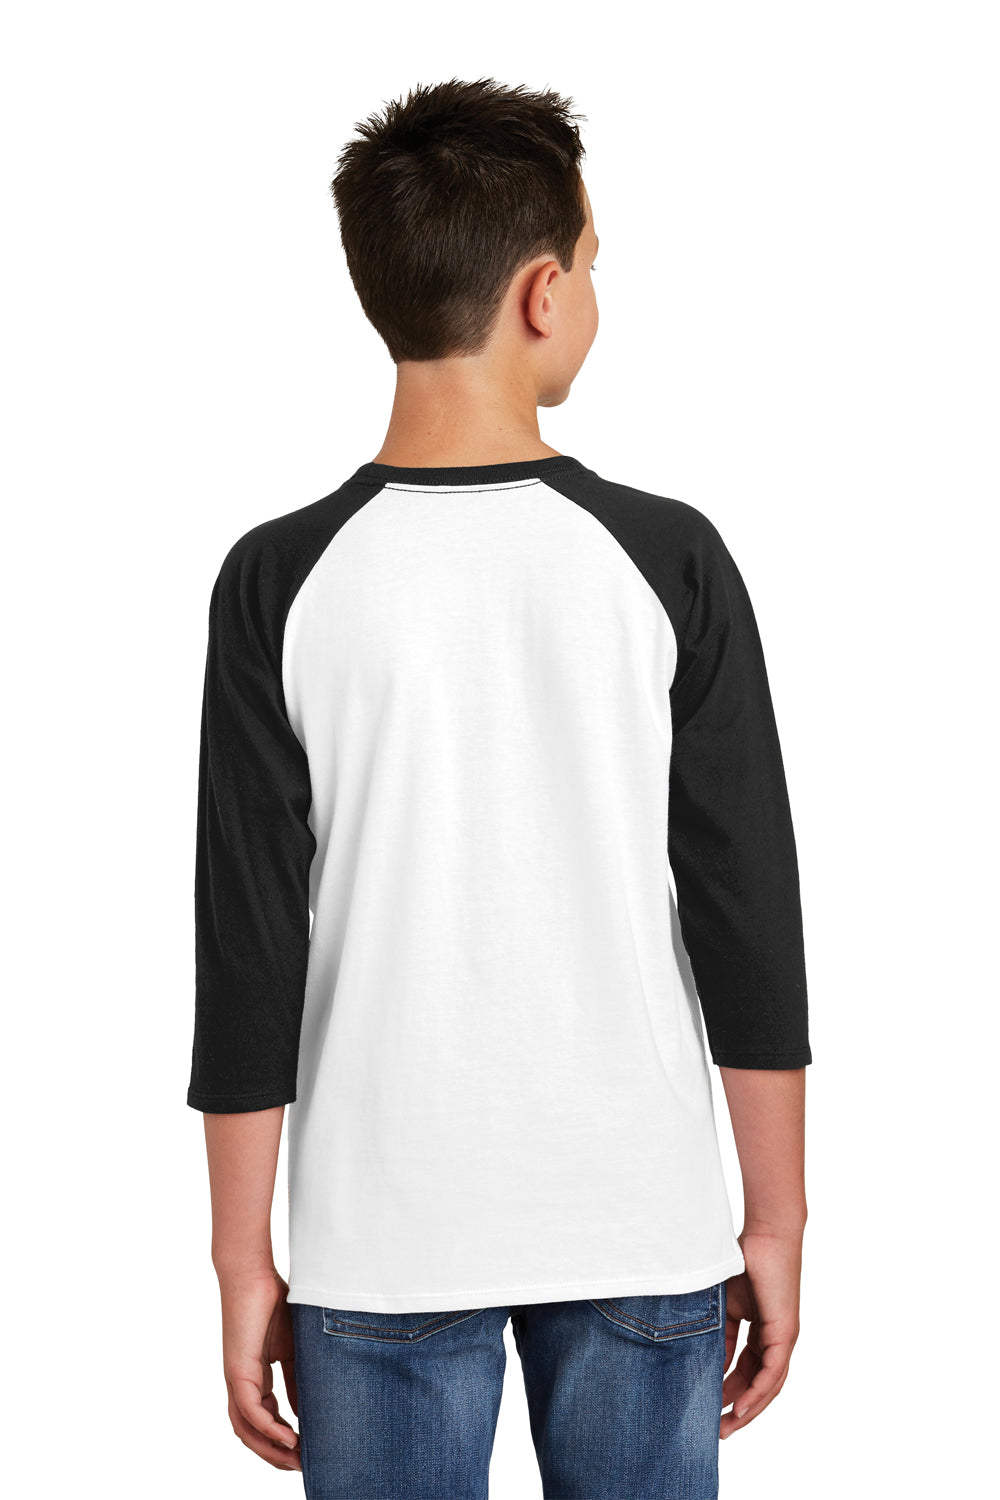 District DT6210Y Youth Very Important 3/4 Sleeve Crewneck T-Shirt White/Black Back